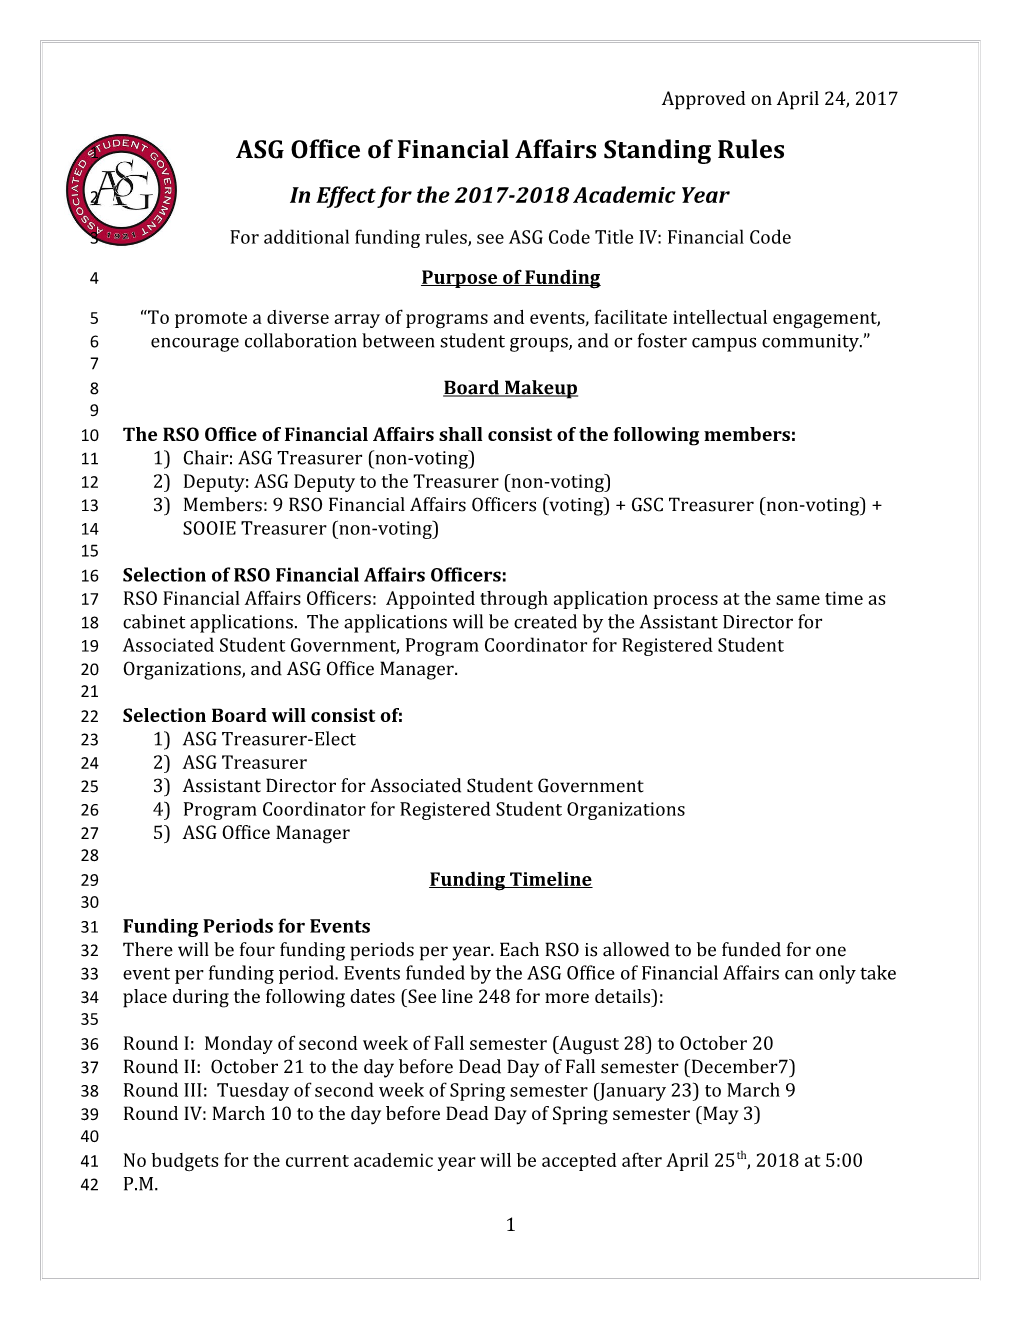 In Effect for the 2017-2018 Academic Year